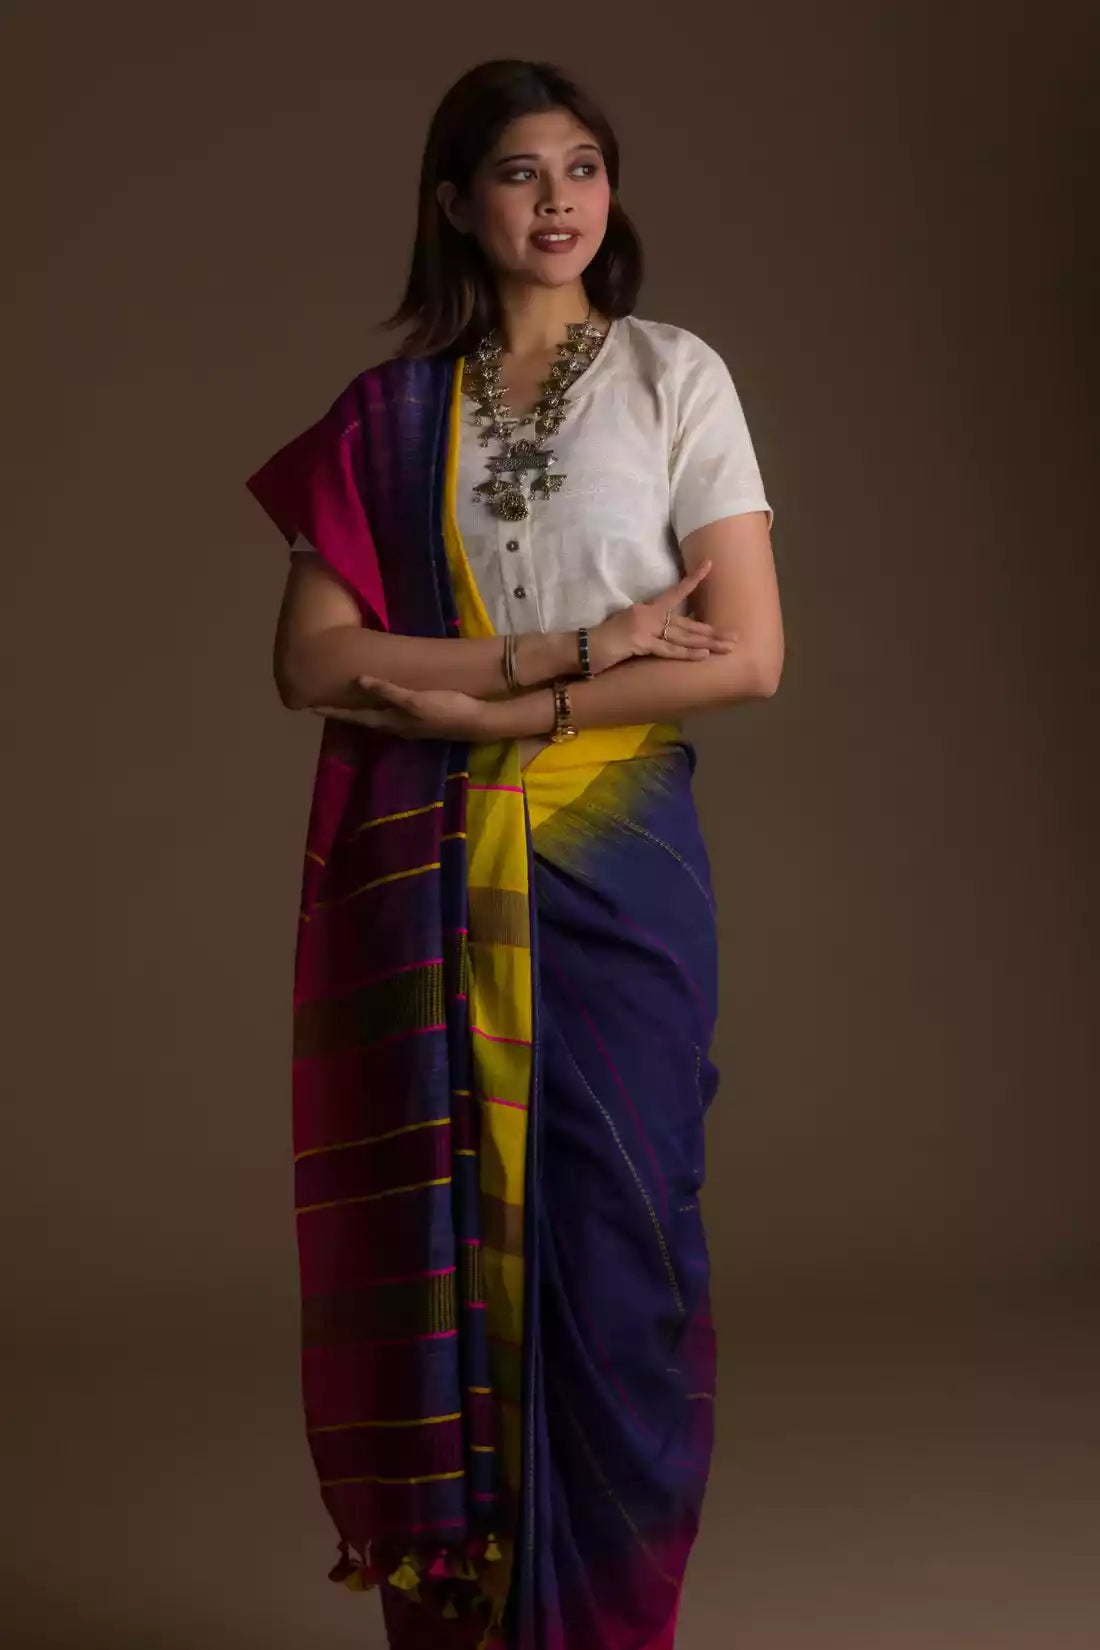 The woman in picture is wearing workwear for woman saree